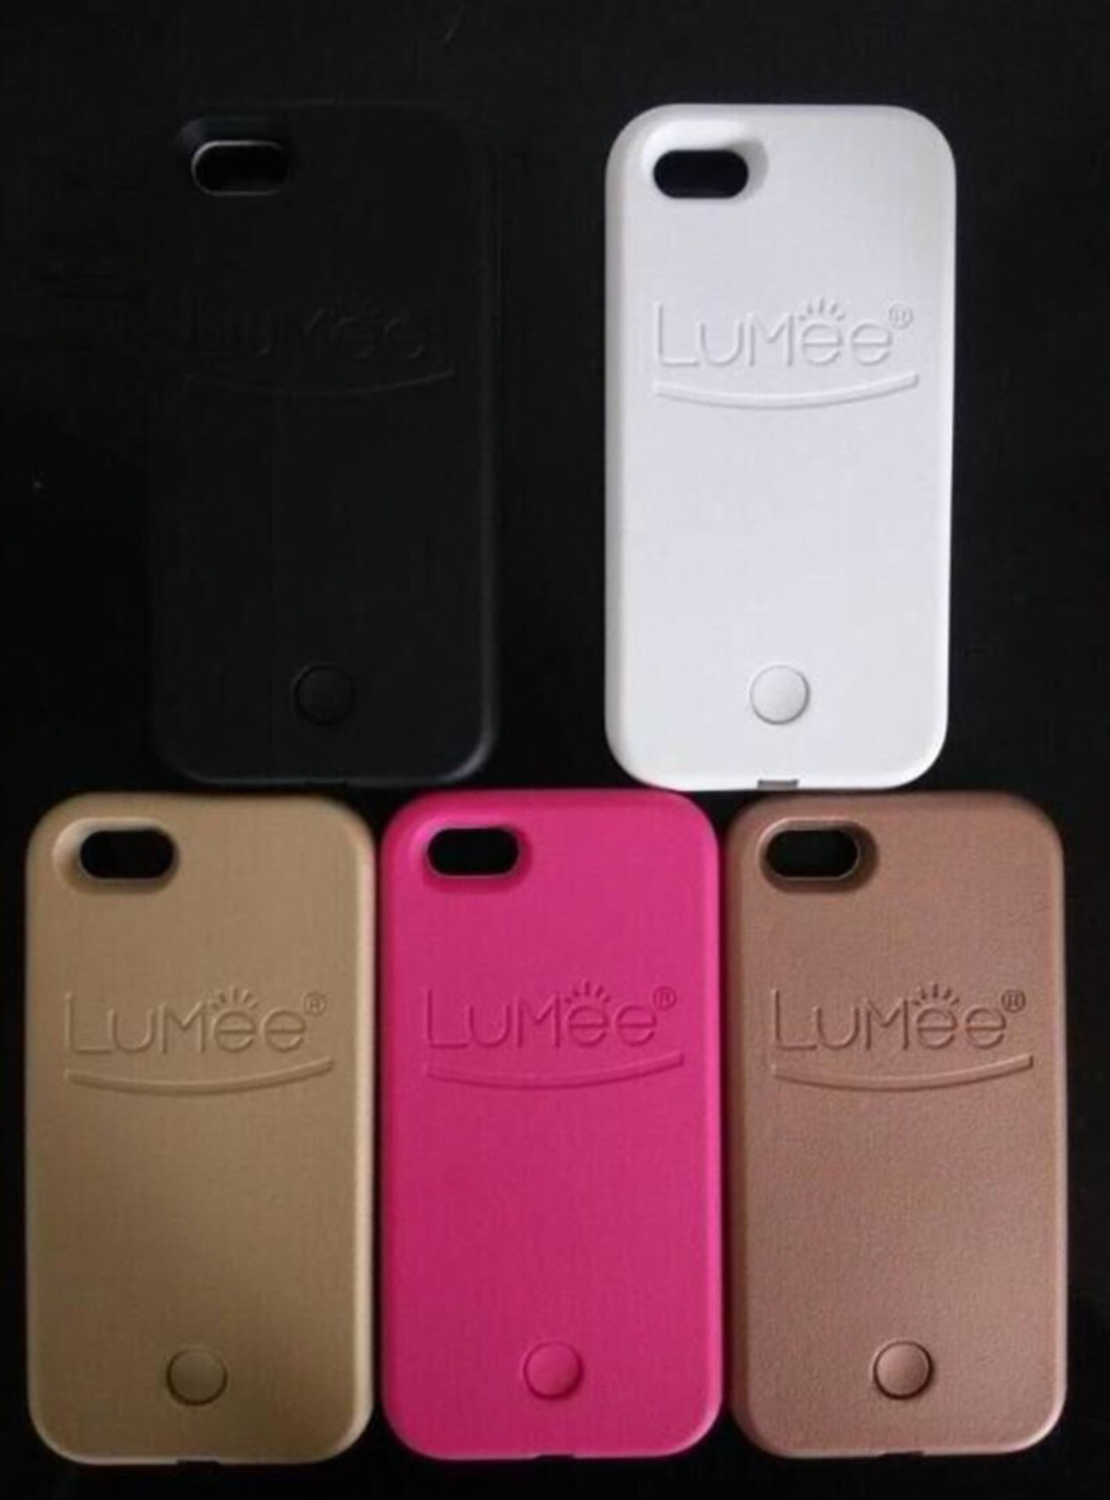 Hybrid led lumee cases iphone 7 plus n iphone 8 plus white fits both( on  stock)